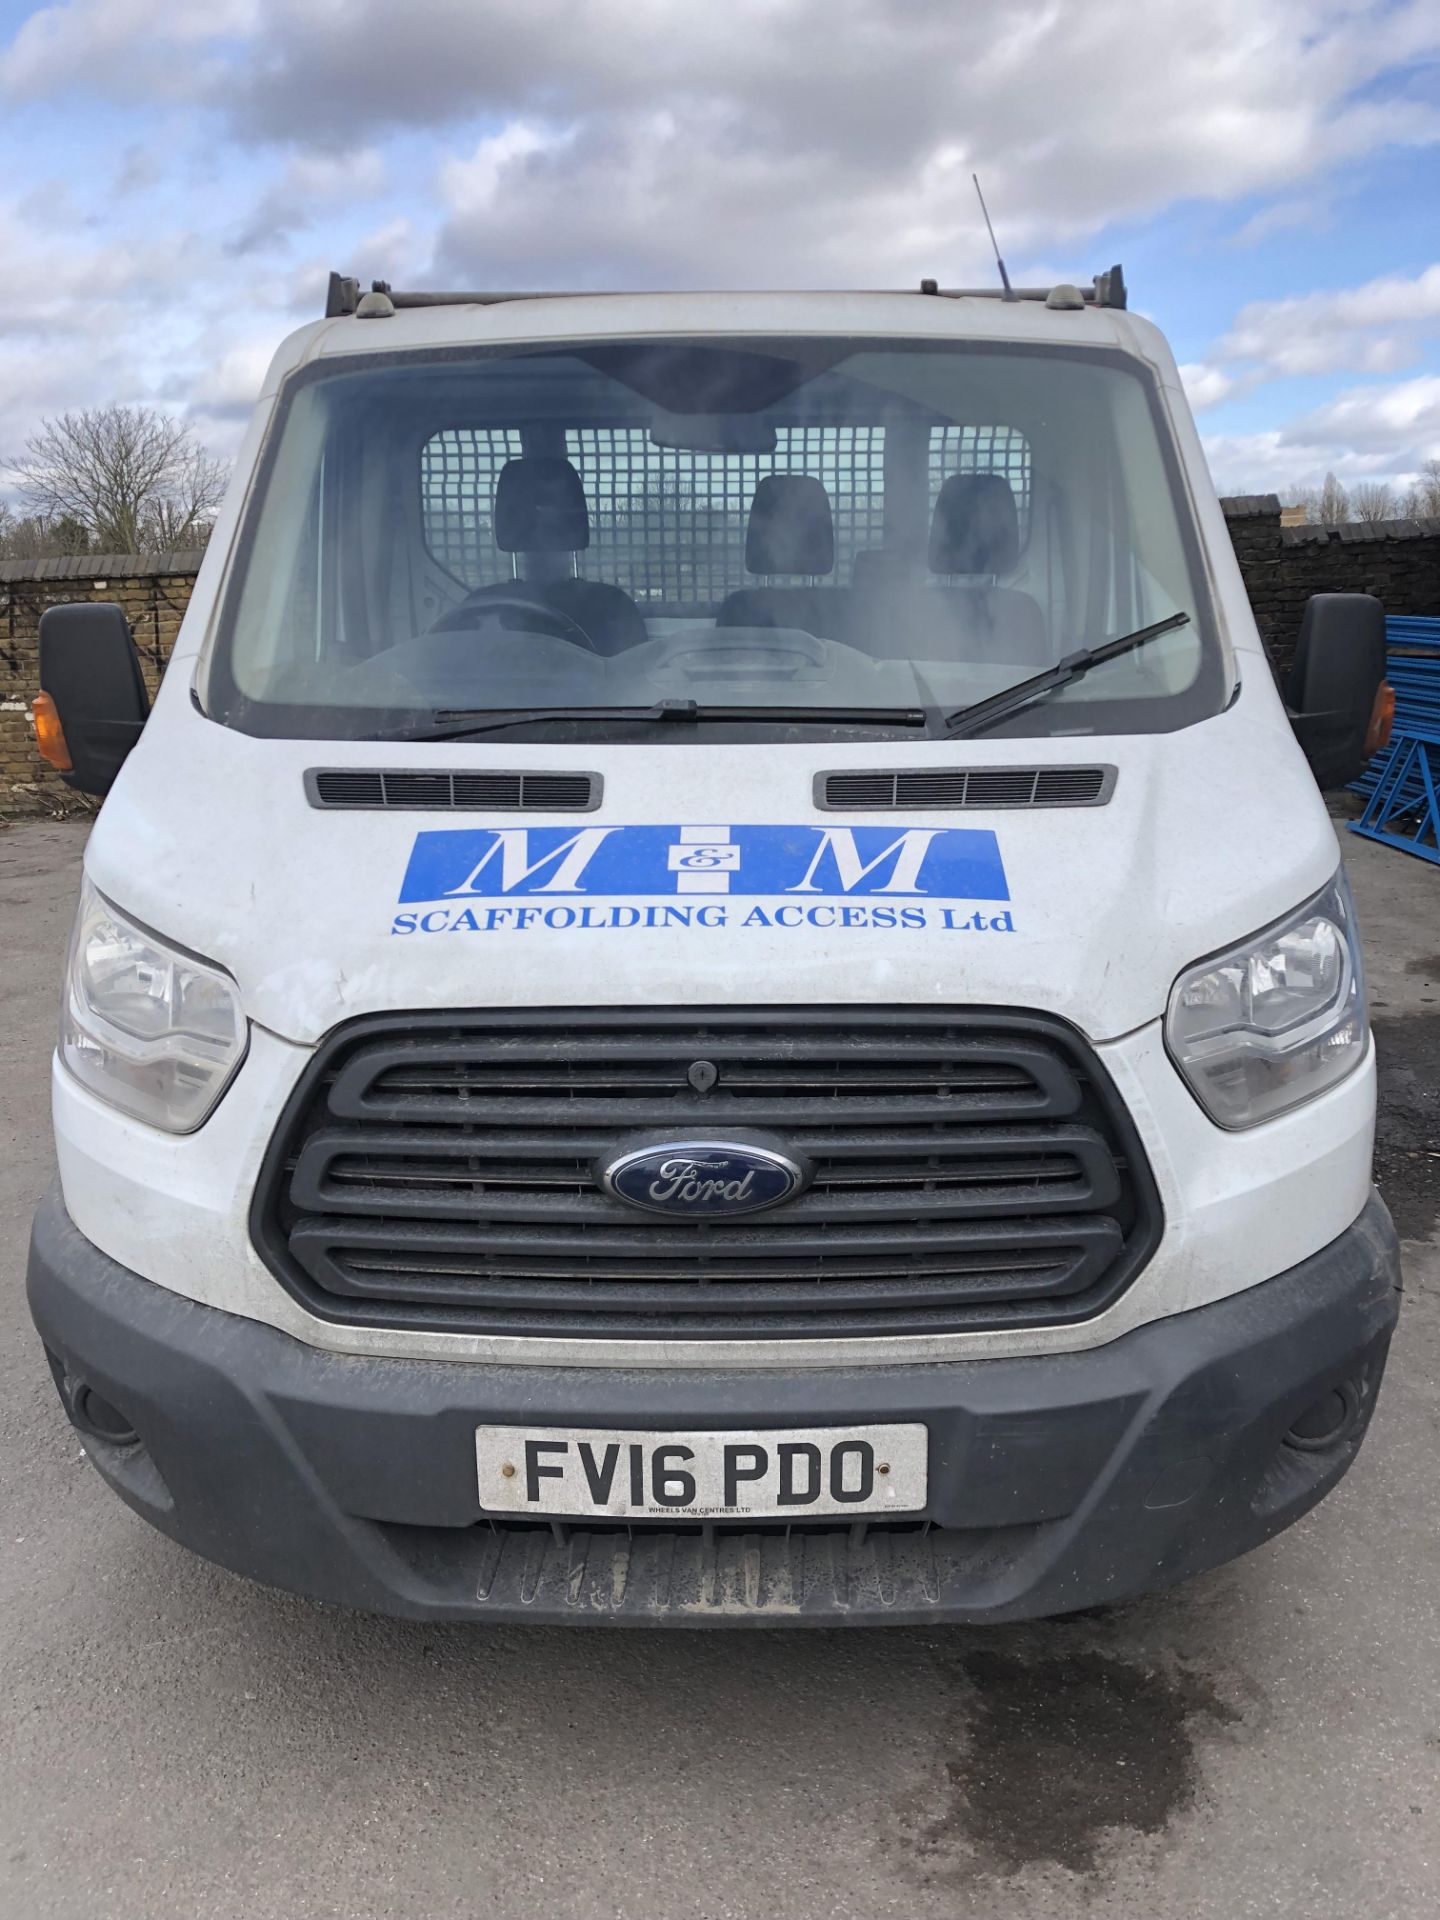 Ford Transit 350 LWB Dropside Truck (2016) - Image 2 of 10